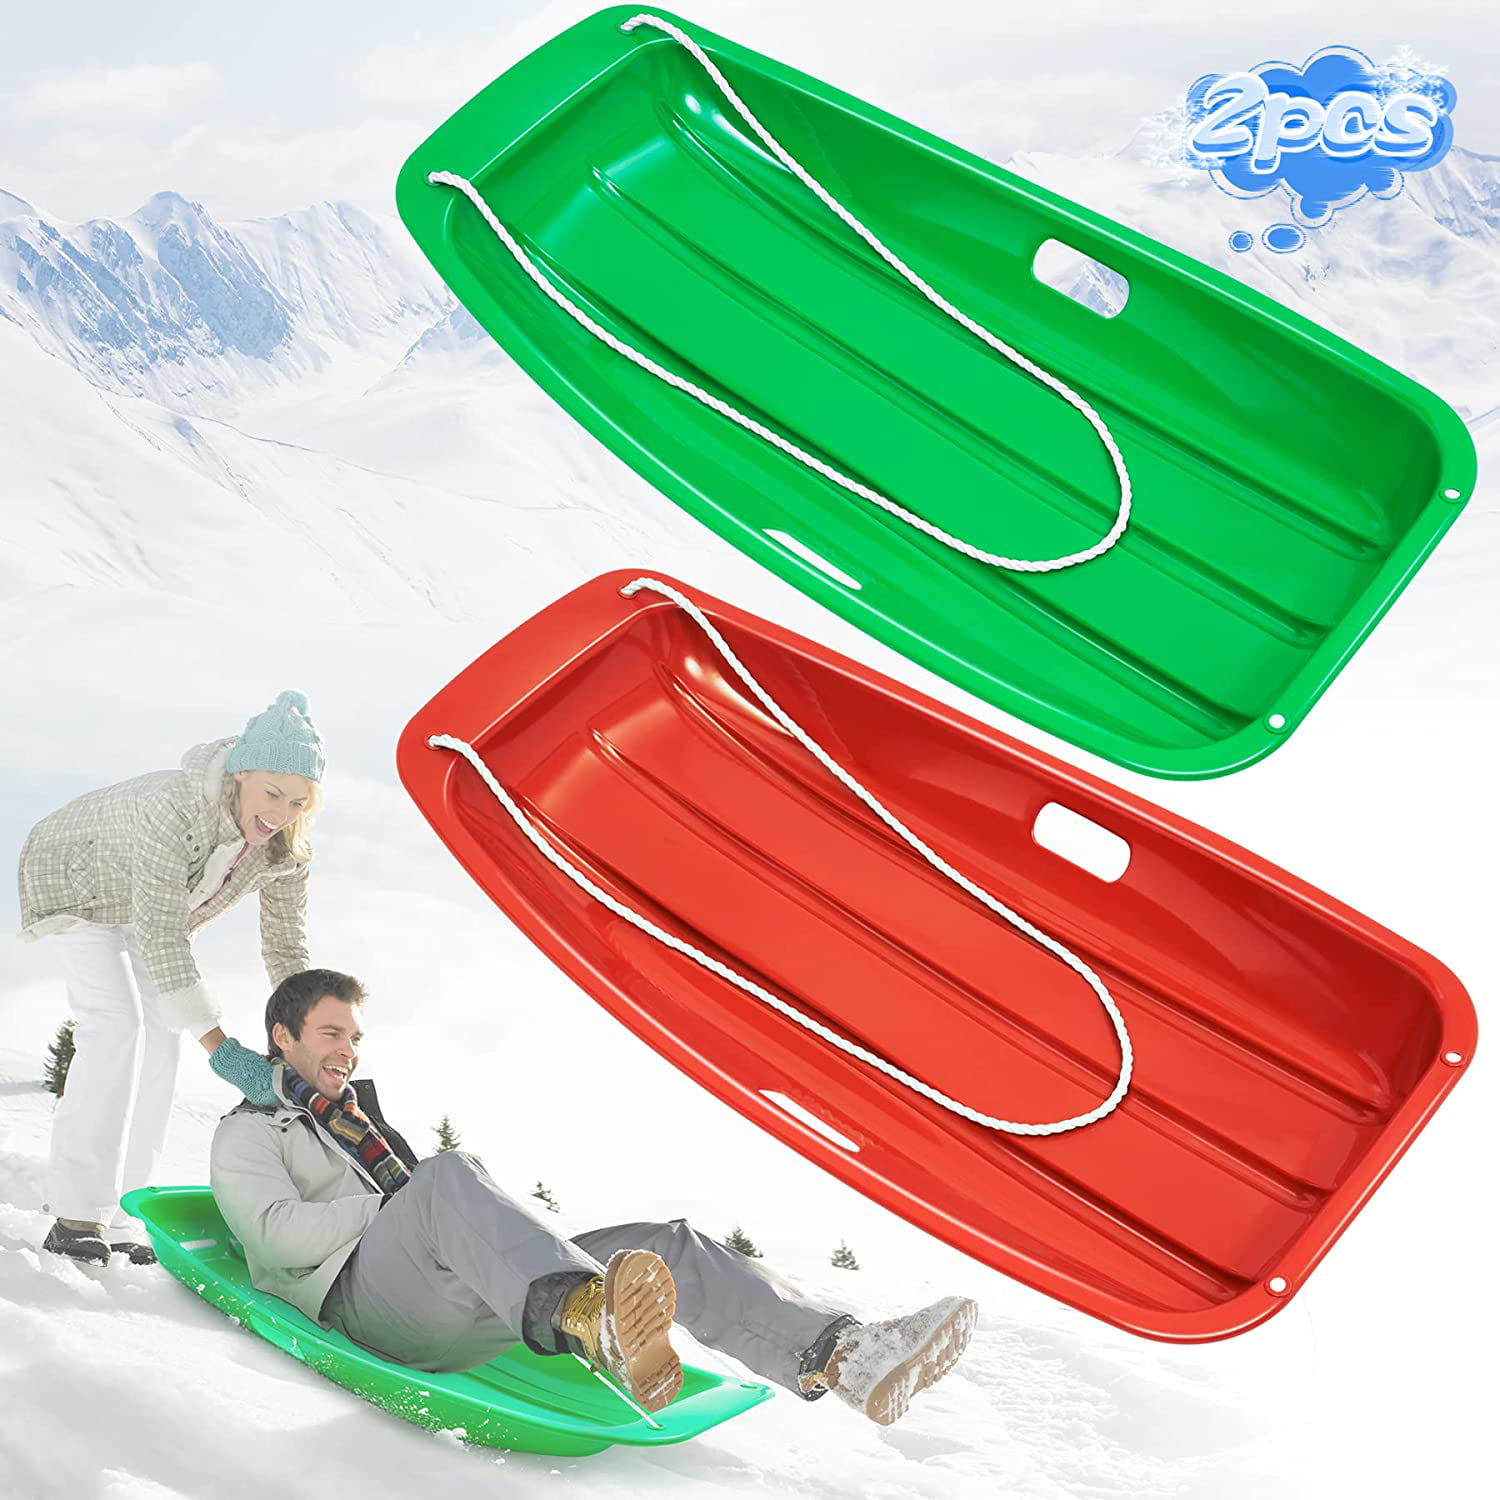 High Speed Snow Sled for Toddlers Kids Sleds for Snow with 2 Handles and Pull Ropes Snow Sled Board,Outdoor Winter Slider Downhill Snow Board